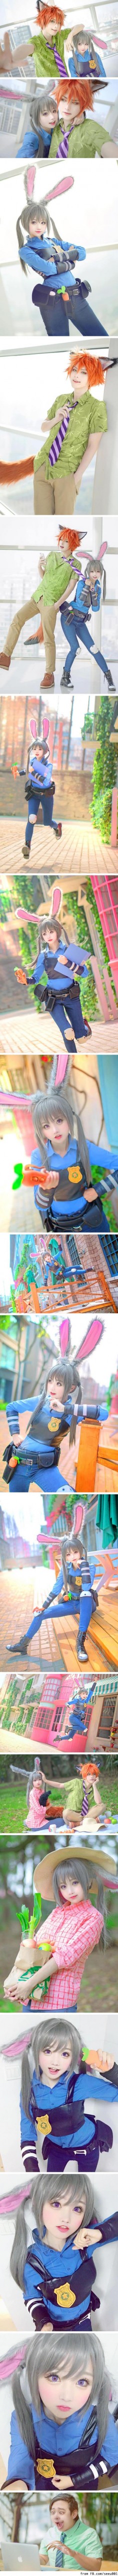 Zootopia cosplay by SeeU and friends